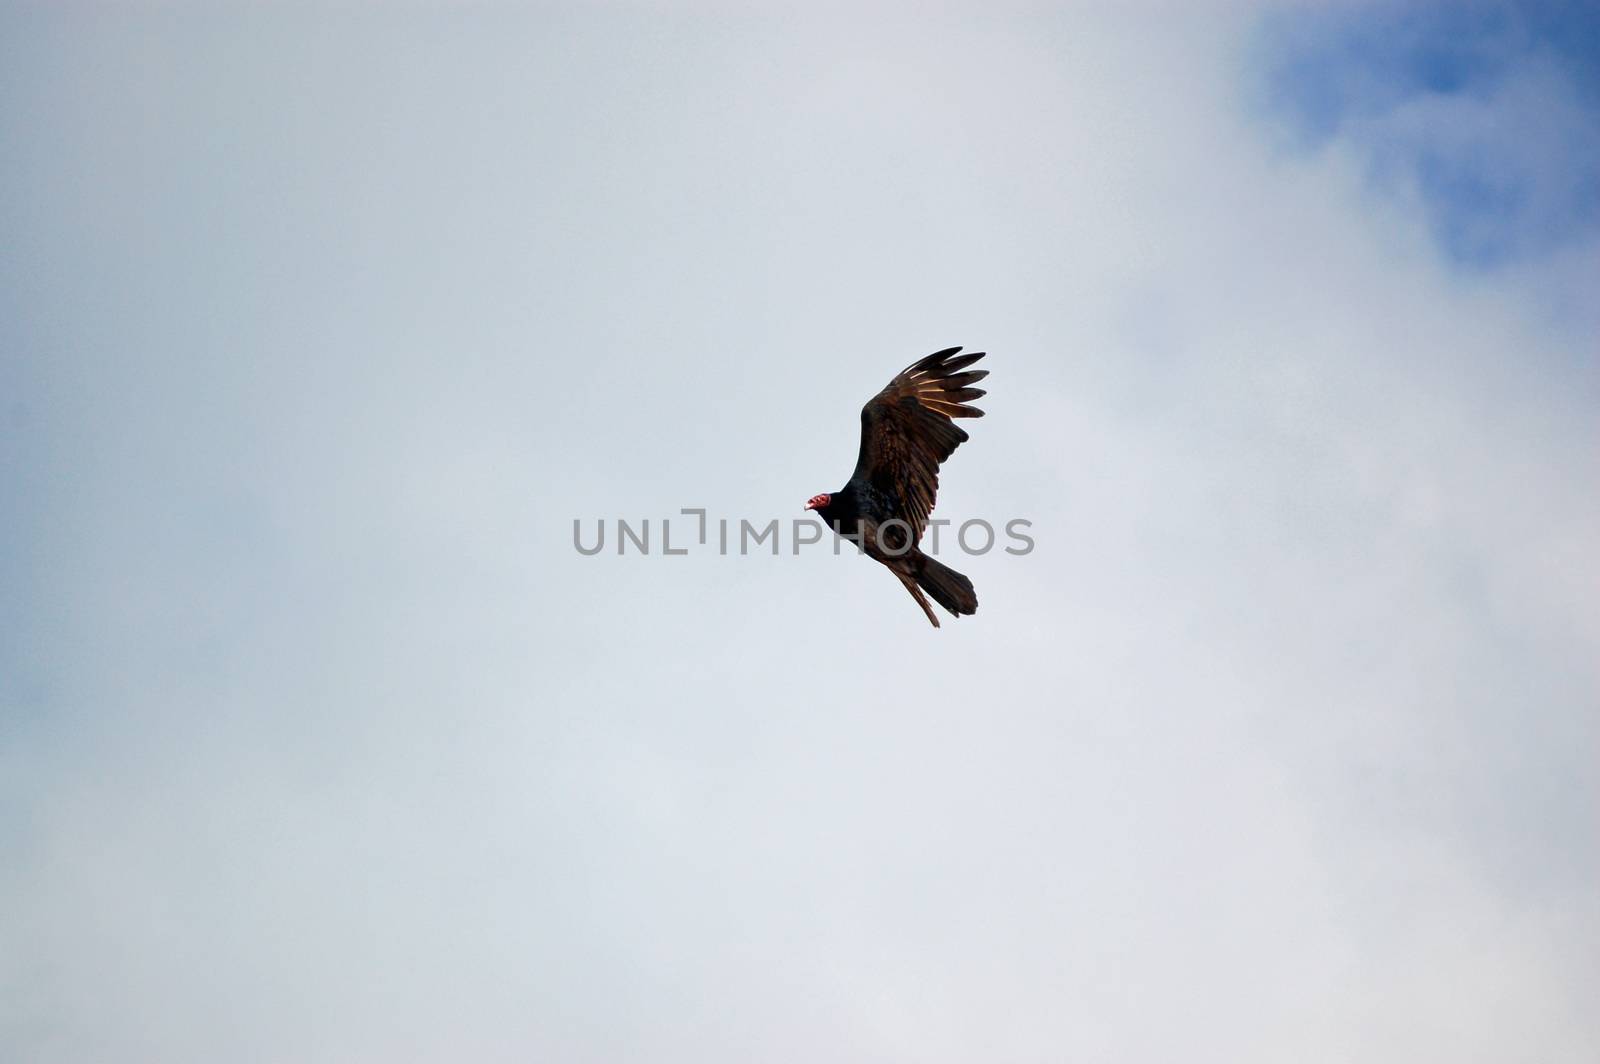 View of a turkey vulture, latin name Cathartes aura, flying through the sky and contemplating landing on a roof.